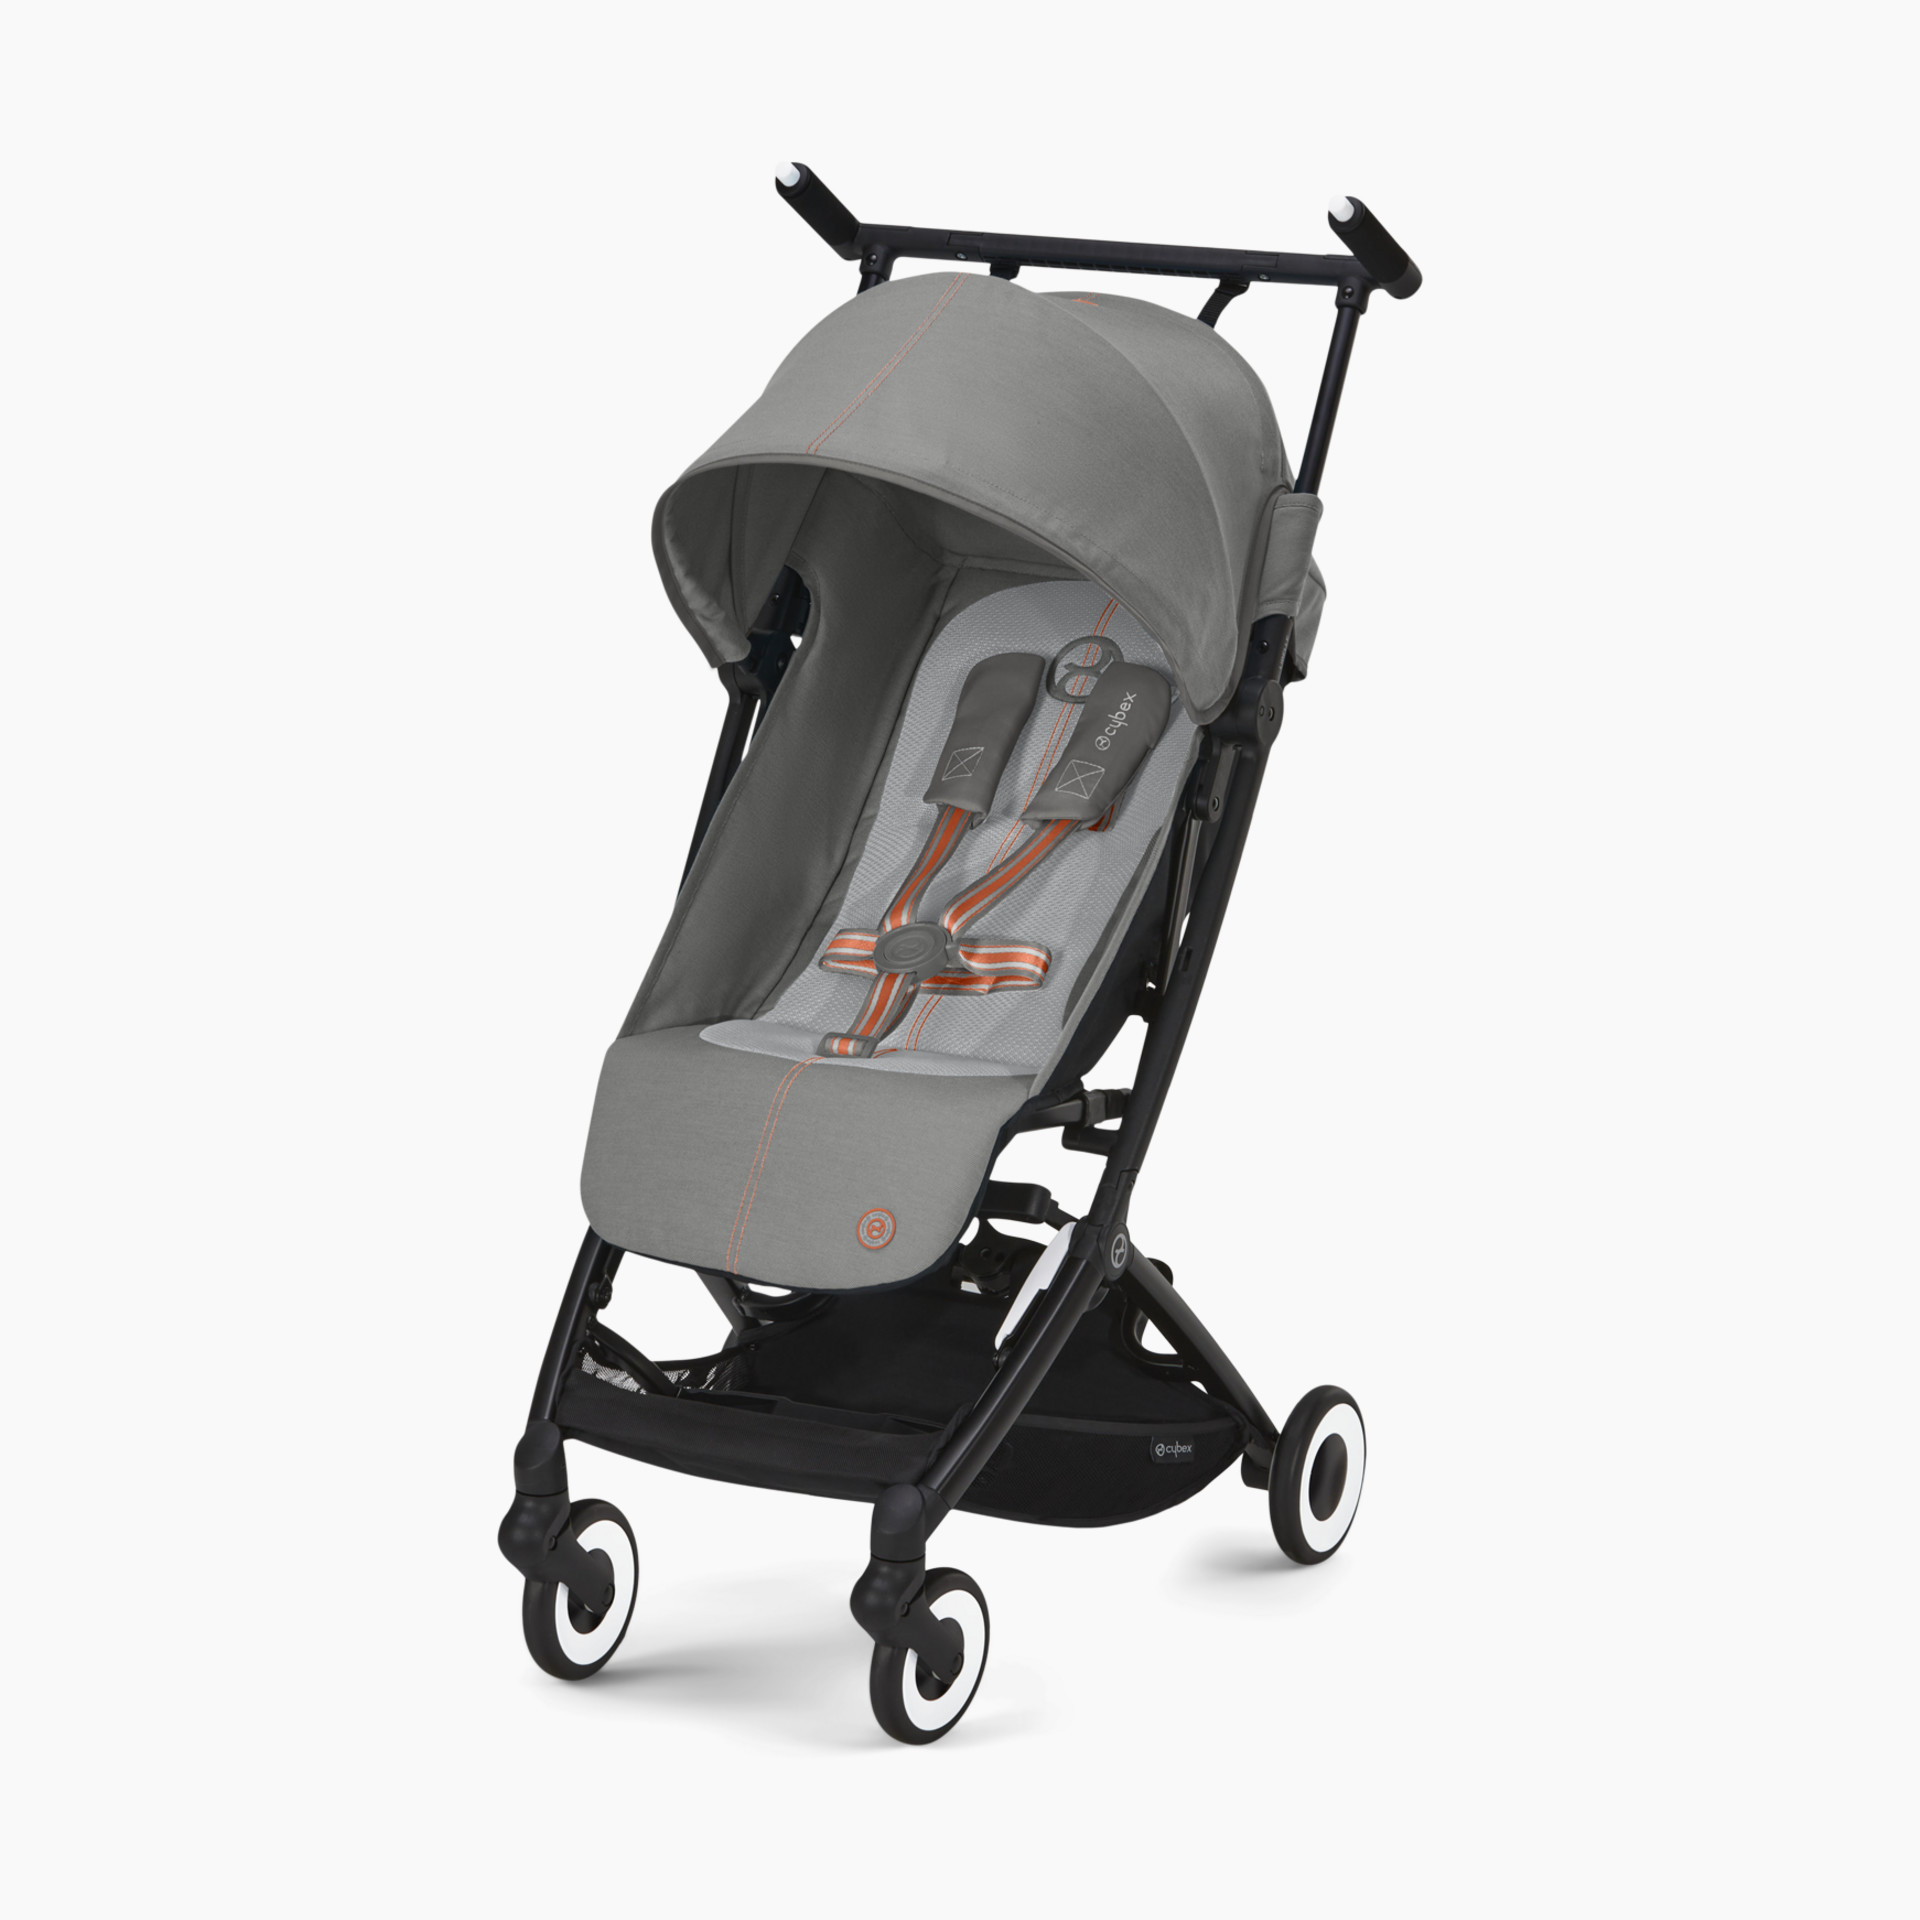  CYBEX Eezy S Twist +2 V2 Baby Stroller with 360° Rotating Seat  for Infants 6 Months and Up - Compatible with CYBEX Car Seats : Baby